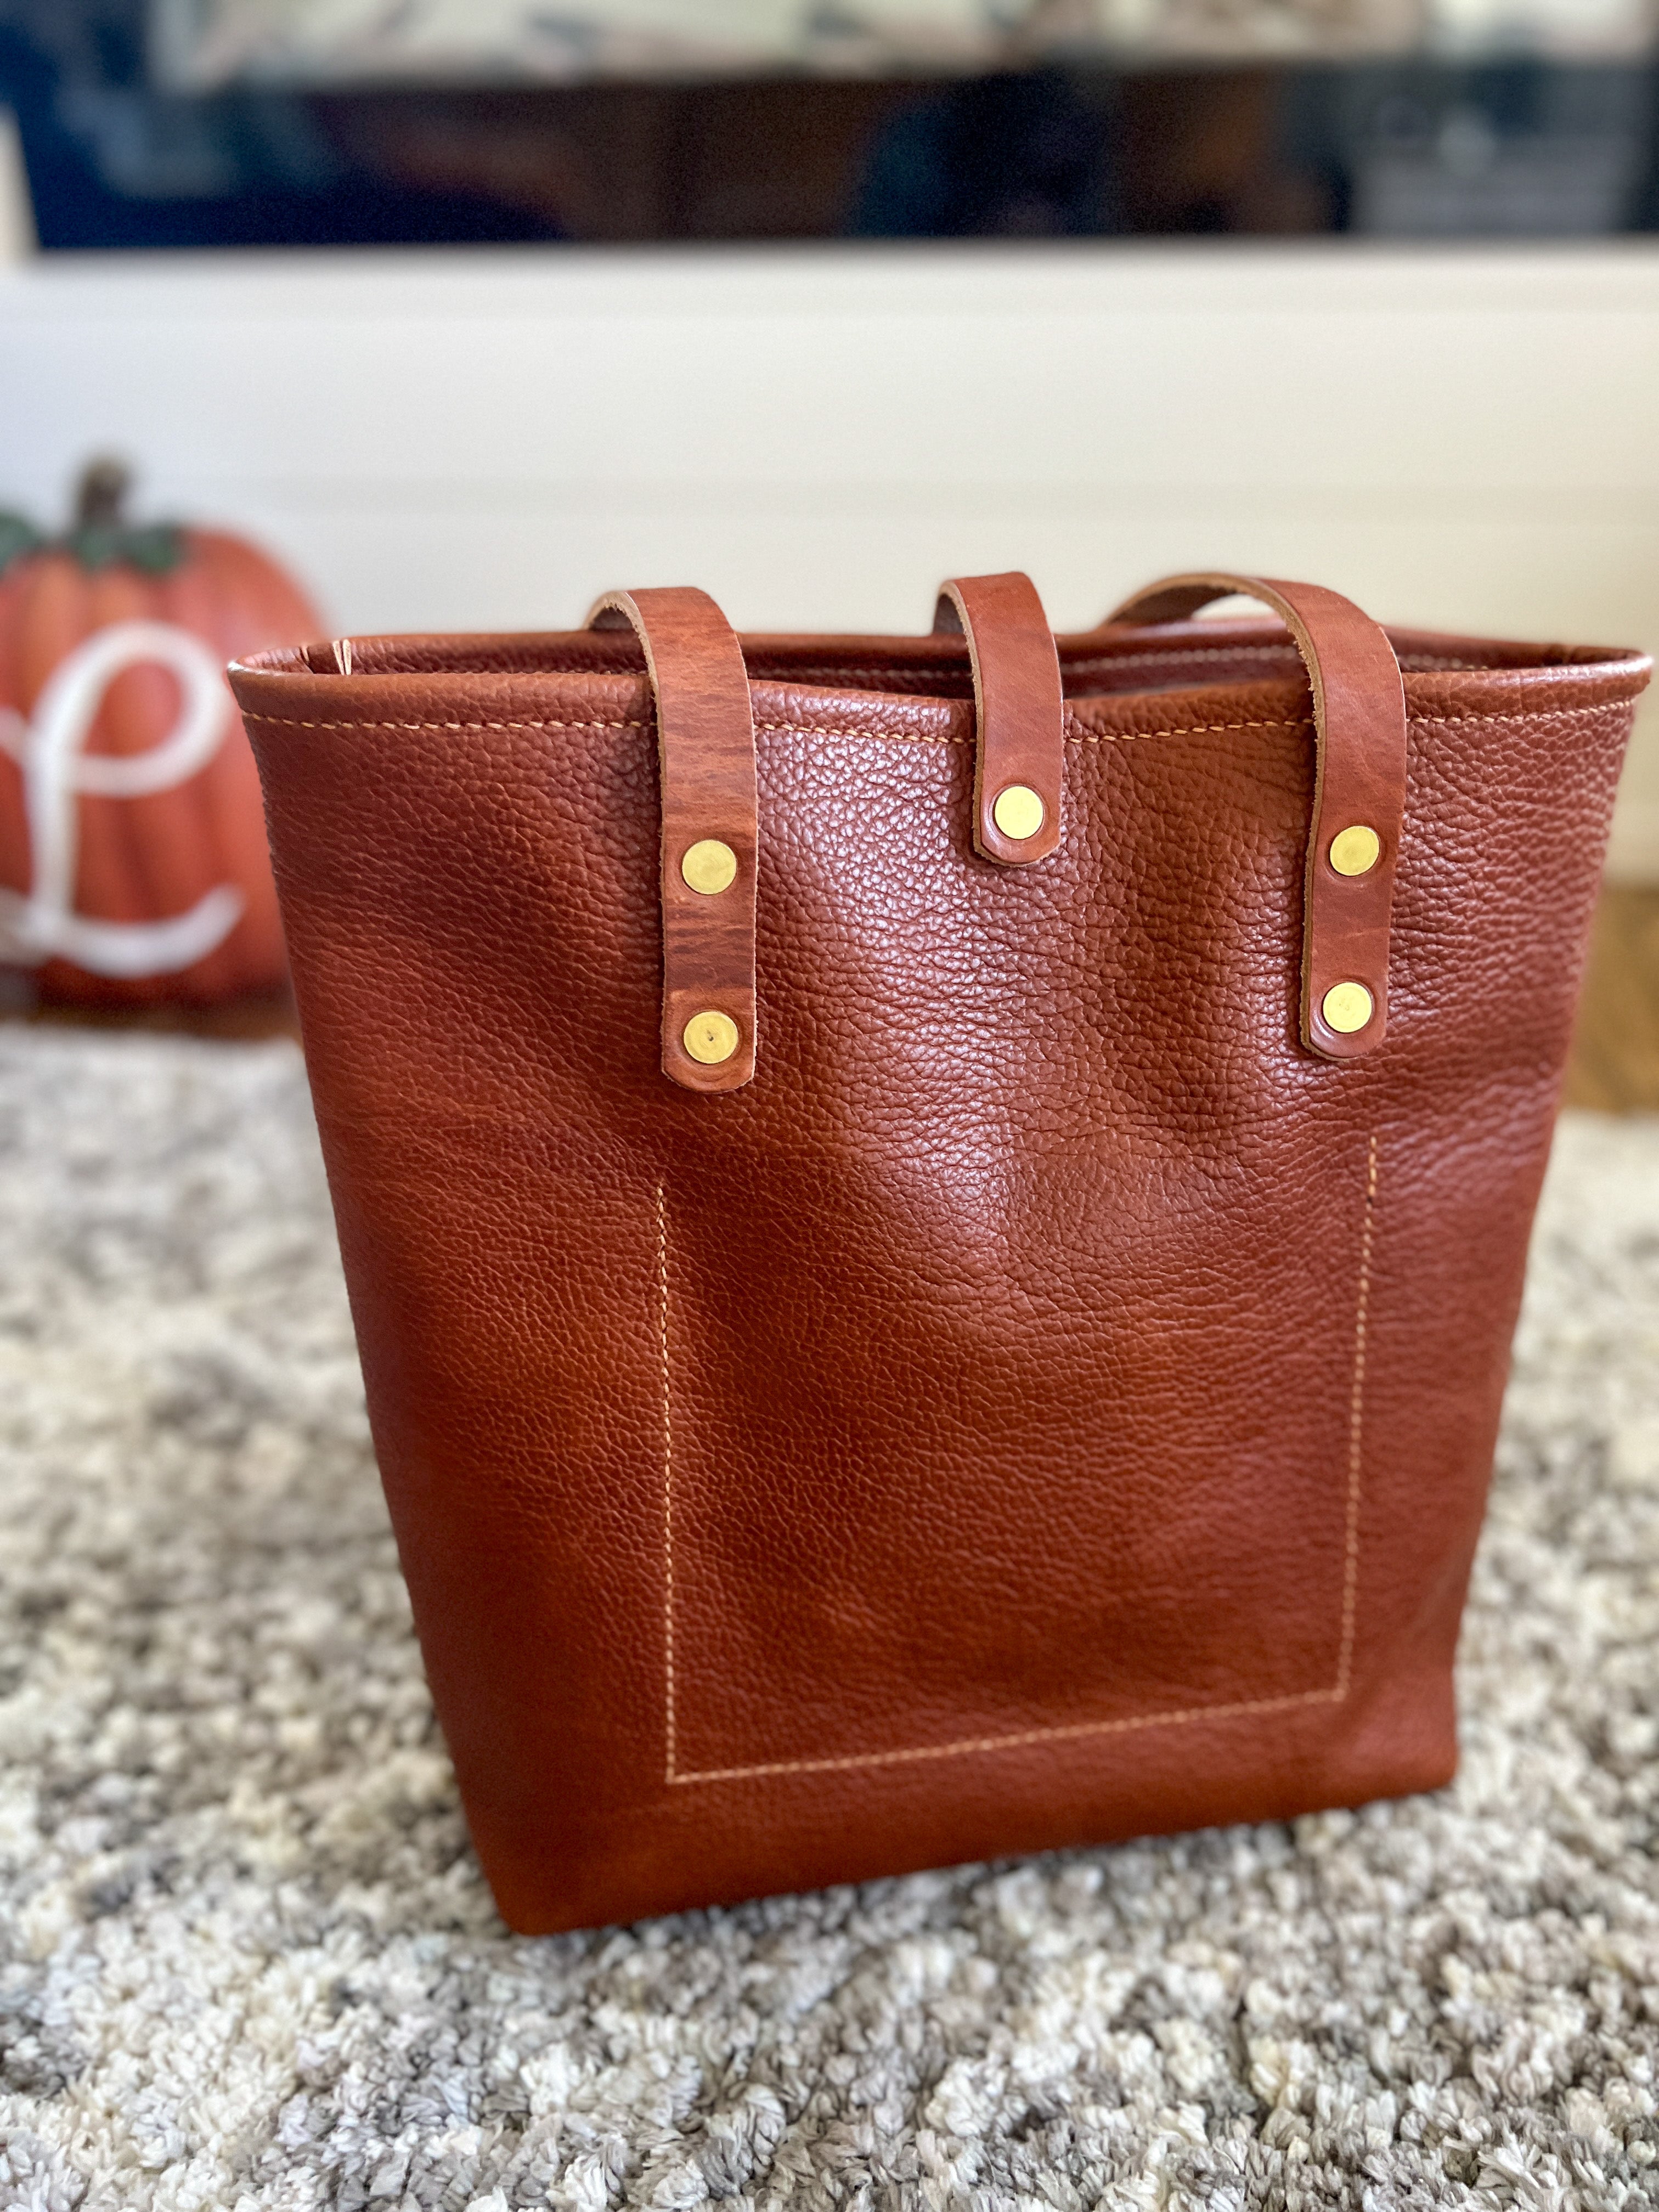 The Horween Tote | Gustin | Accessories | Tote Bags